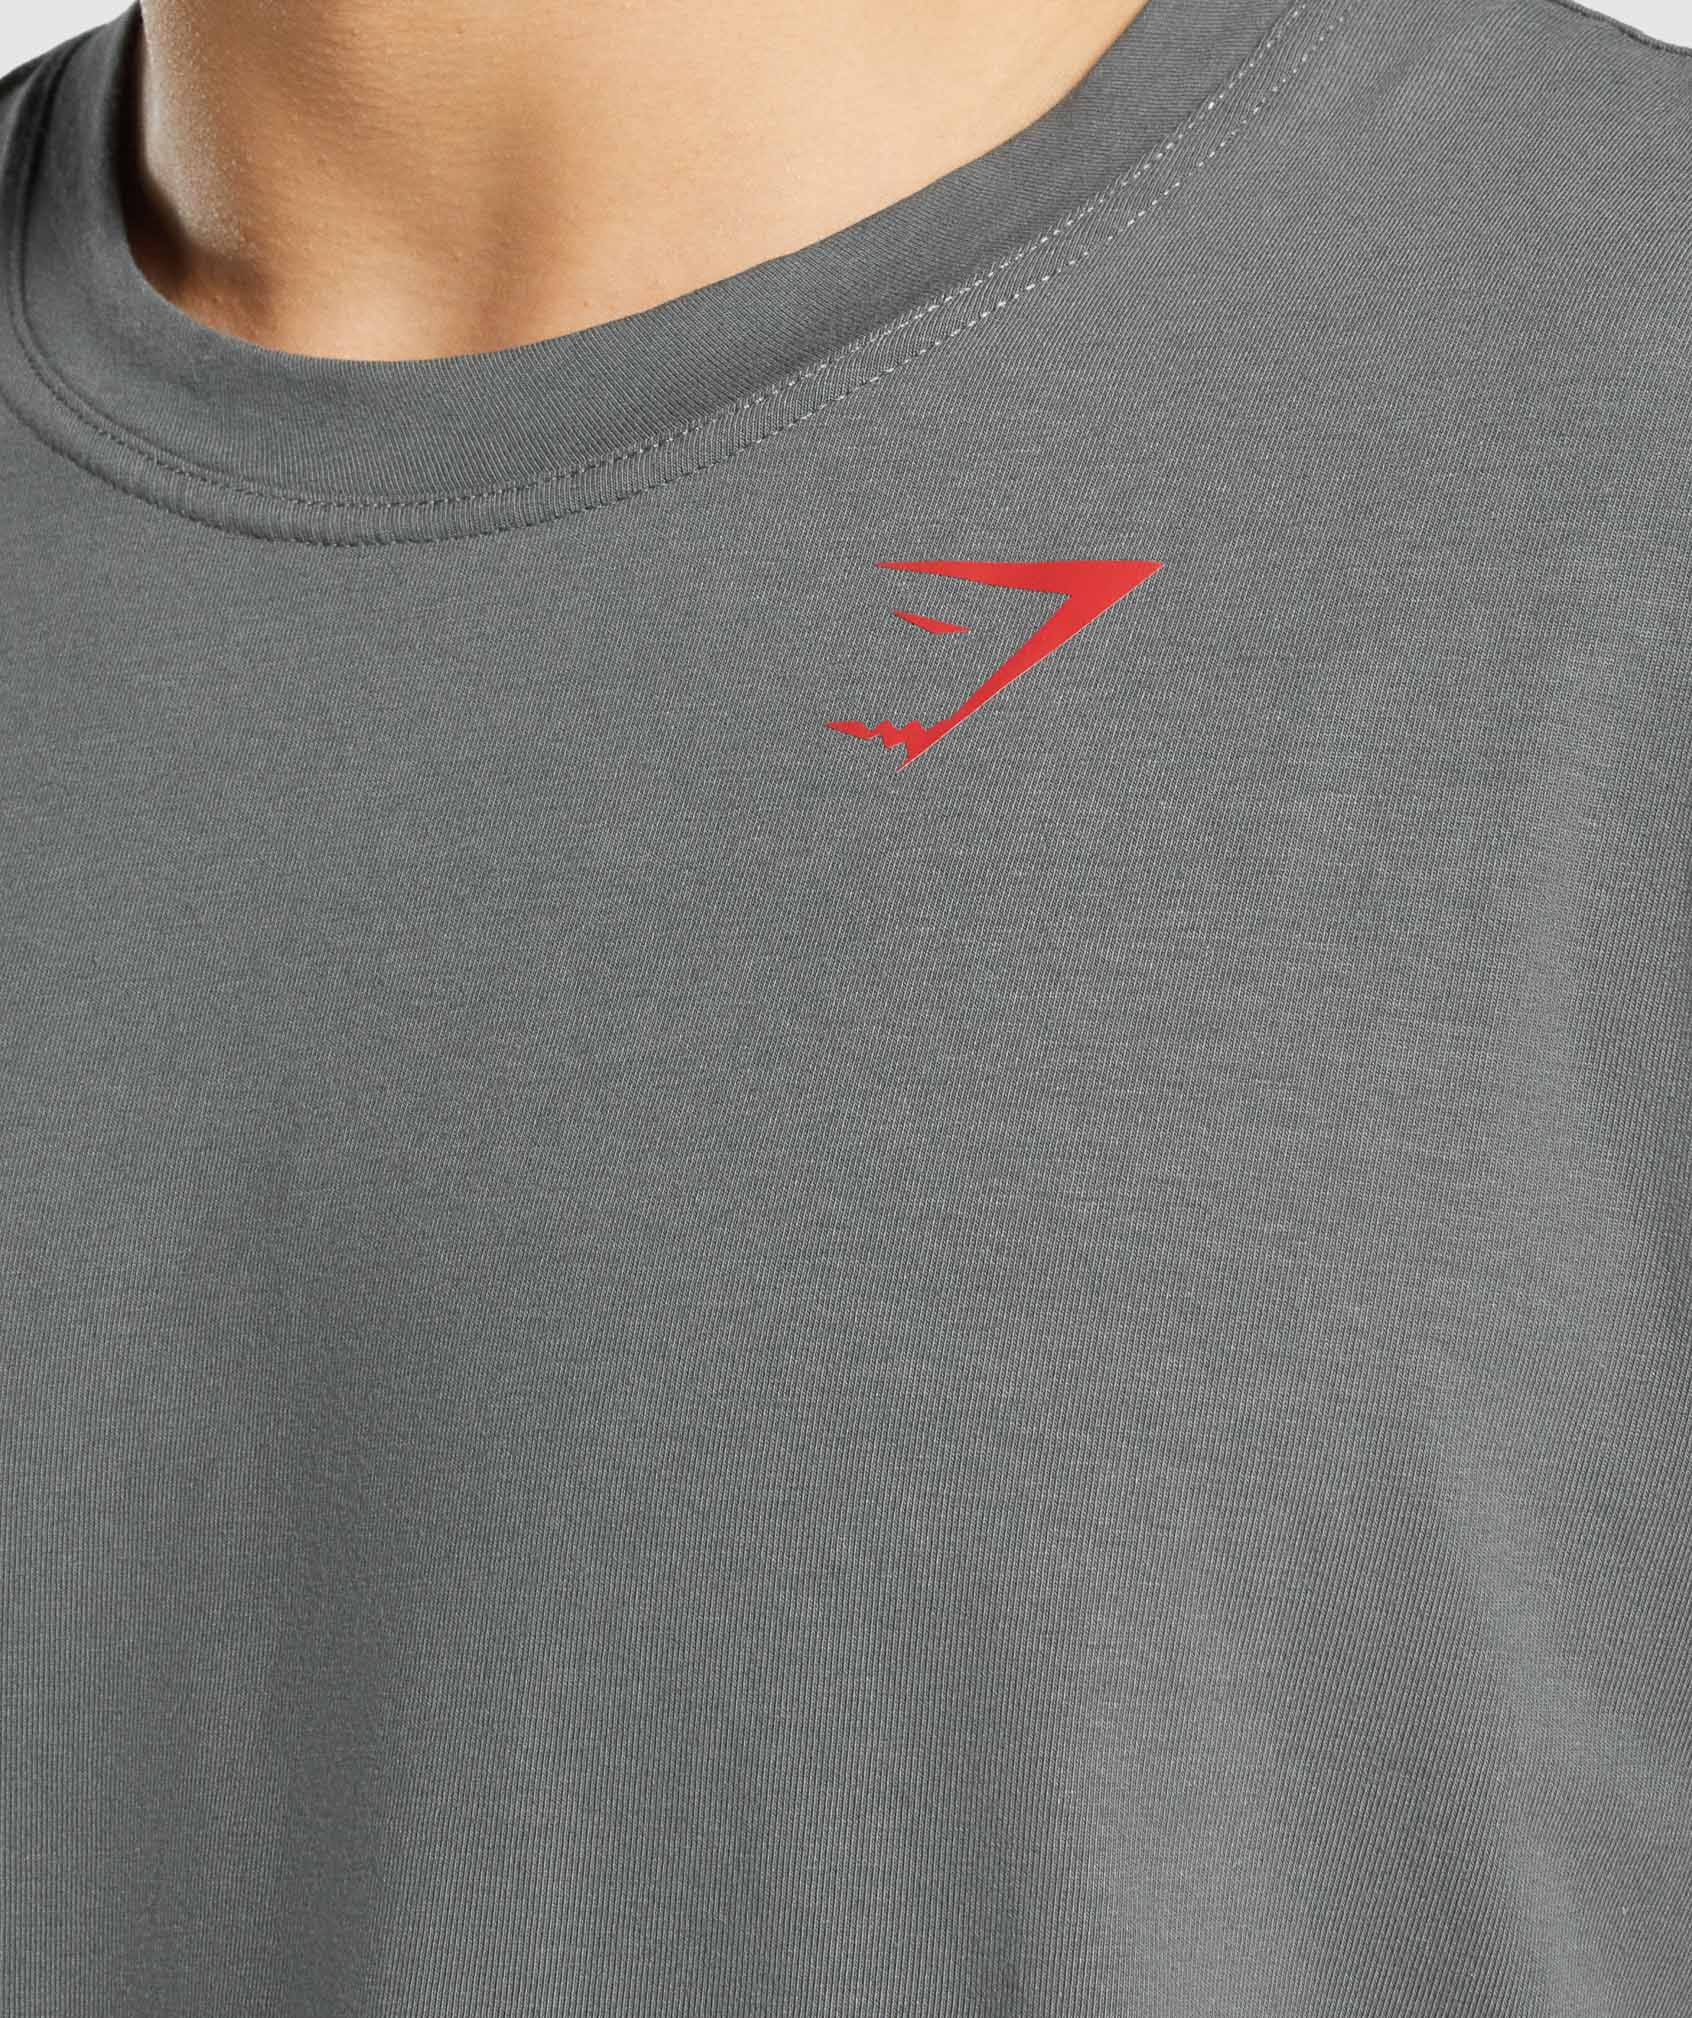 Power T-Shirt in Charcoal Grey - view 6